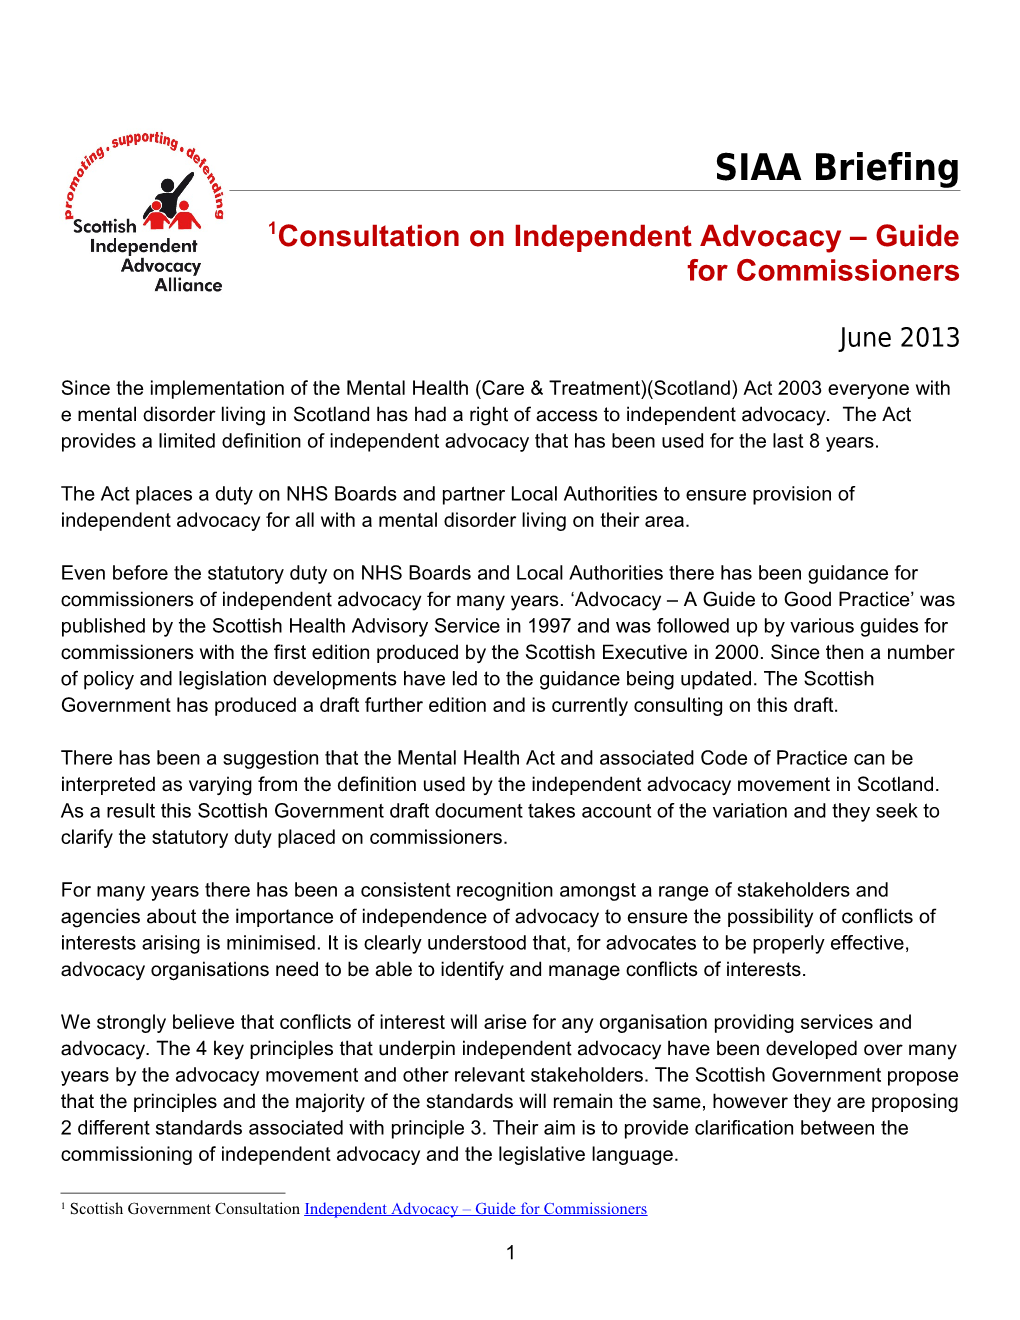 Guide to Promoting Advocacy and Influencing Using the SIAA Manifesto